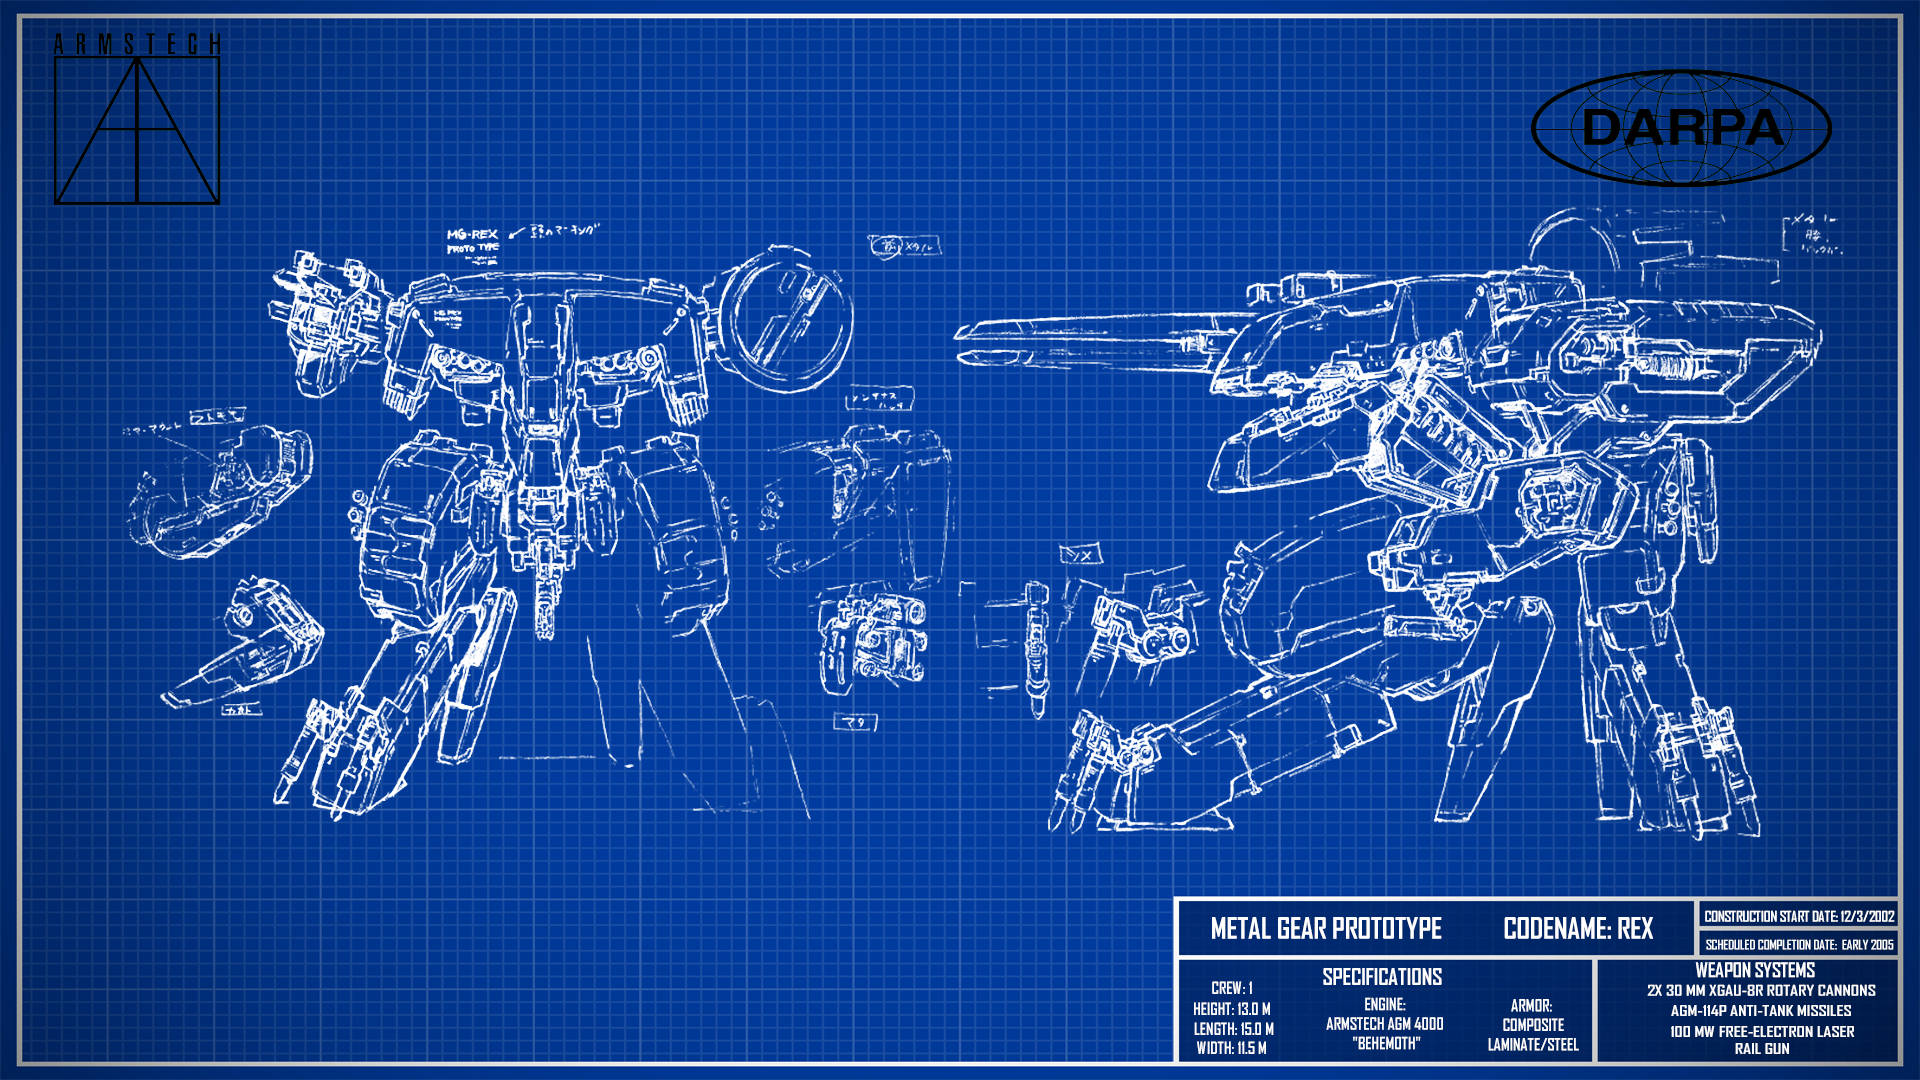 For the Metal Gear Solid fans here I made a MG REX Blueprint